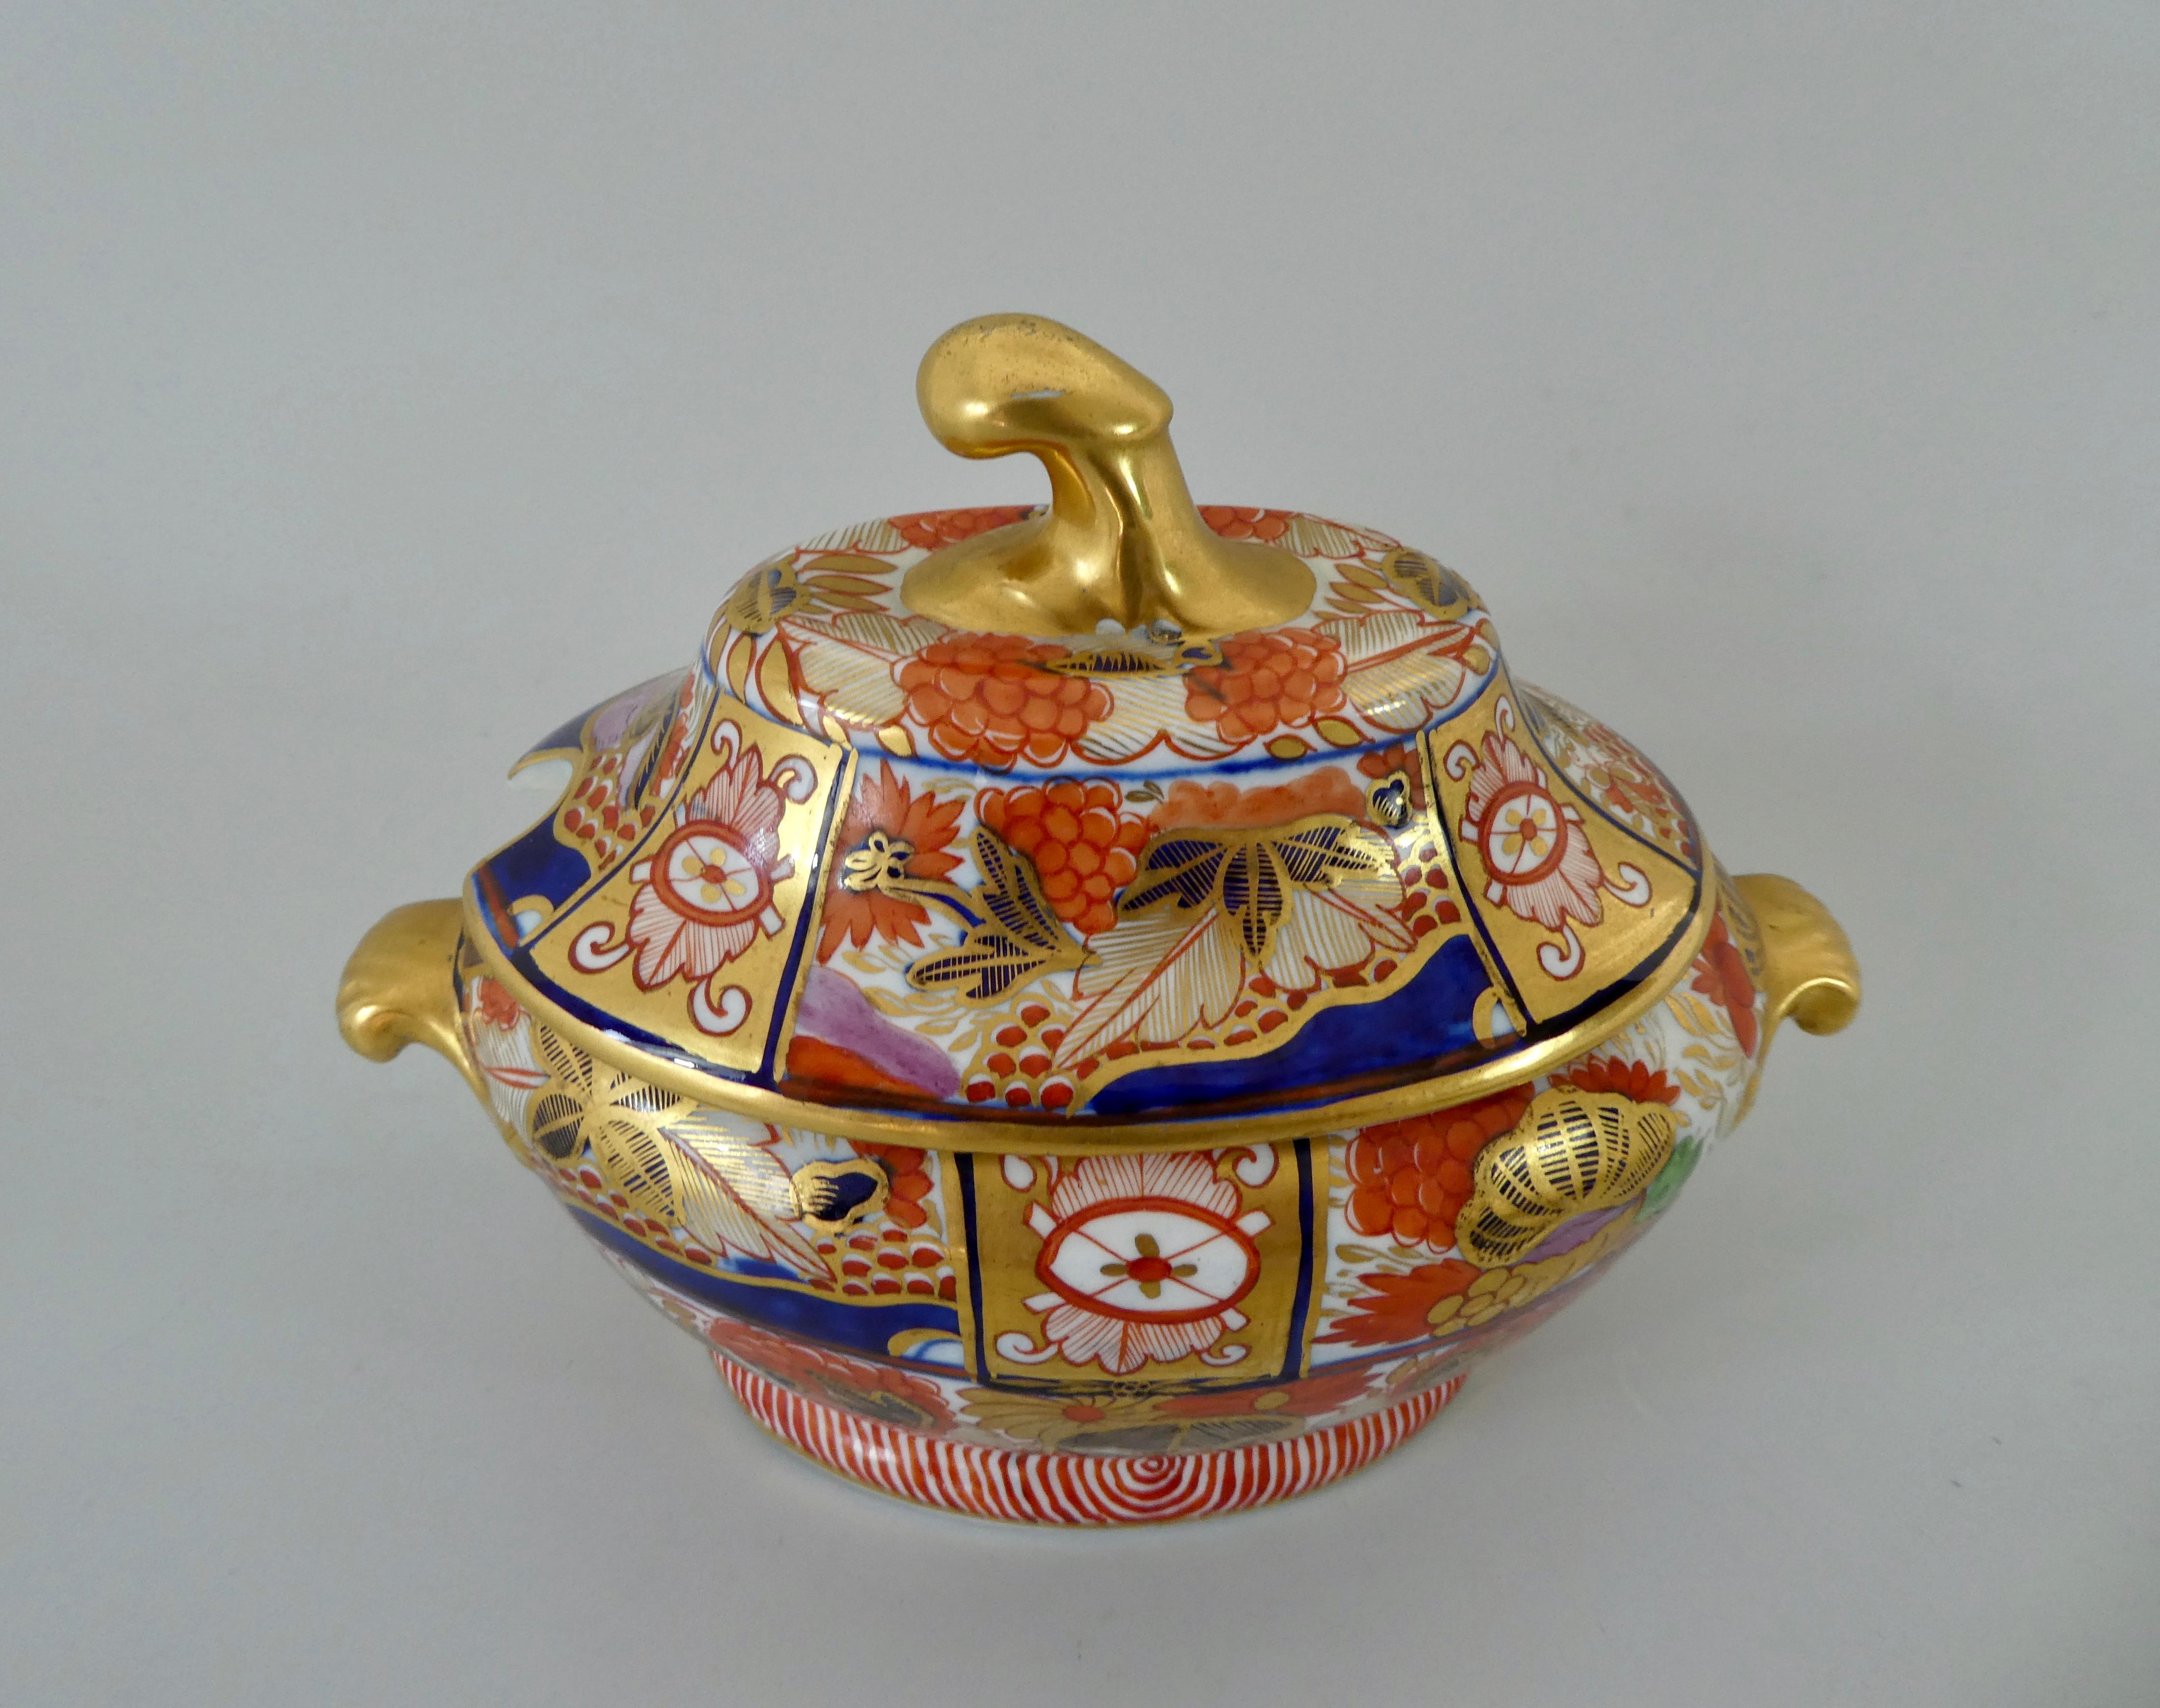 Chamberlains Worcester porcelain sauce tureen and cover, circa 1800. Finely hand painted in a rich Imari pattern, with panels of stylized plants. The tureen having gilt scroll handles, and the cover surmounted by a gilt scroll finial.
Measures: